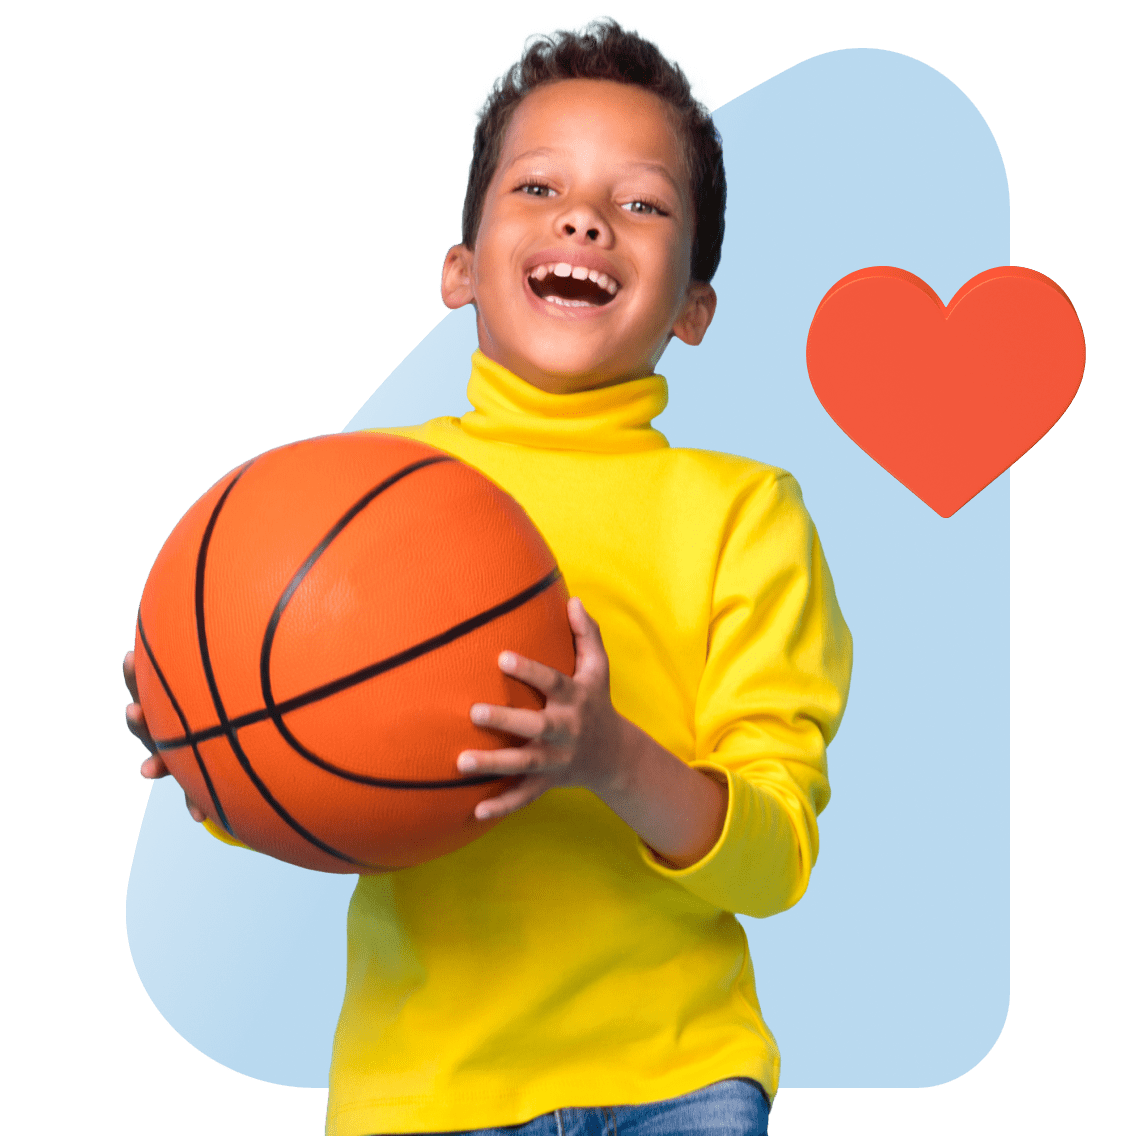 Health and Human Services Education Career Pathway image 1 (nombre 2 Young Boy Basketball Heart)